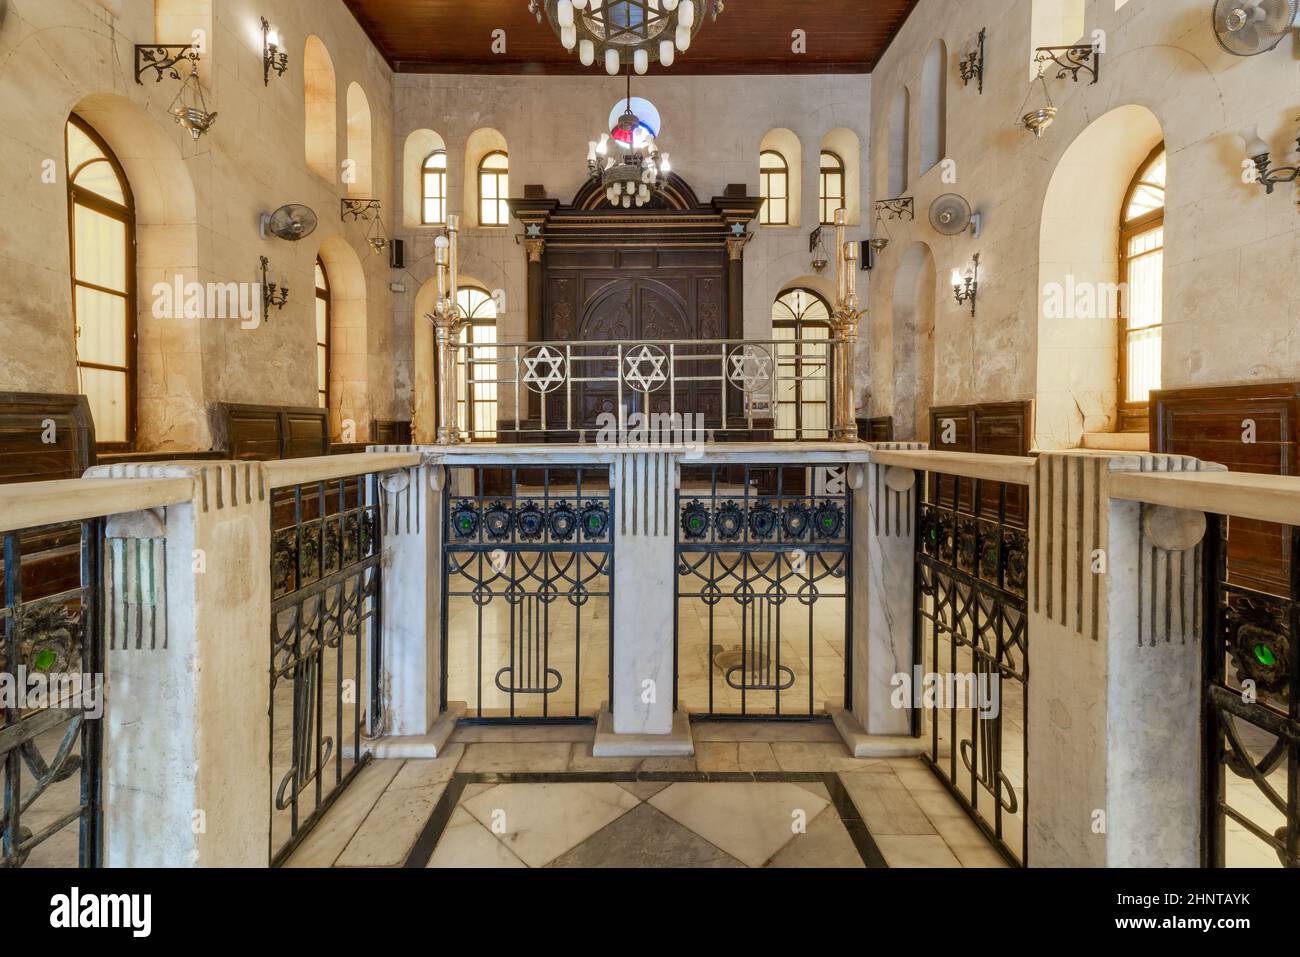 Altar of historic Jewish Maimonides Synagogue or Rav Moshe Synagogue with wooden entrance at the far end, Cairo, Egypt Stock Photo